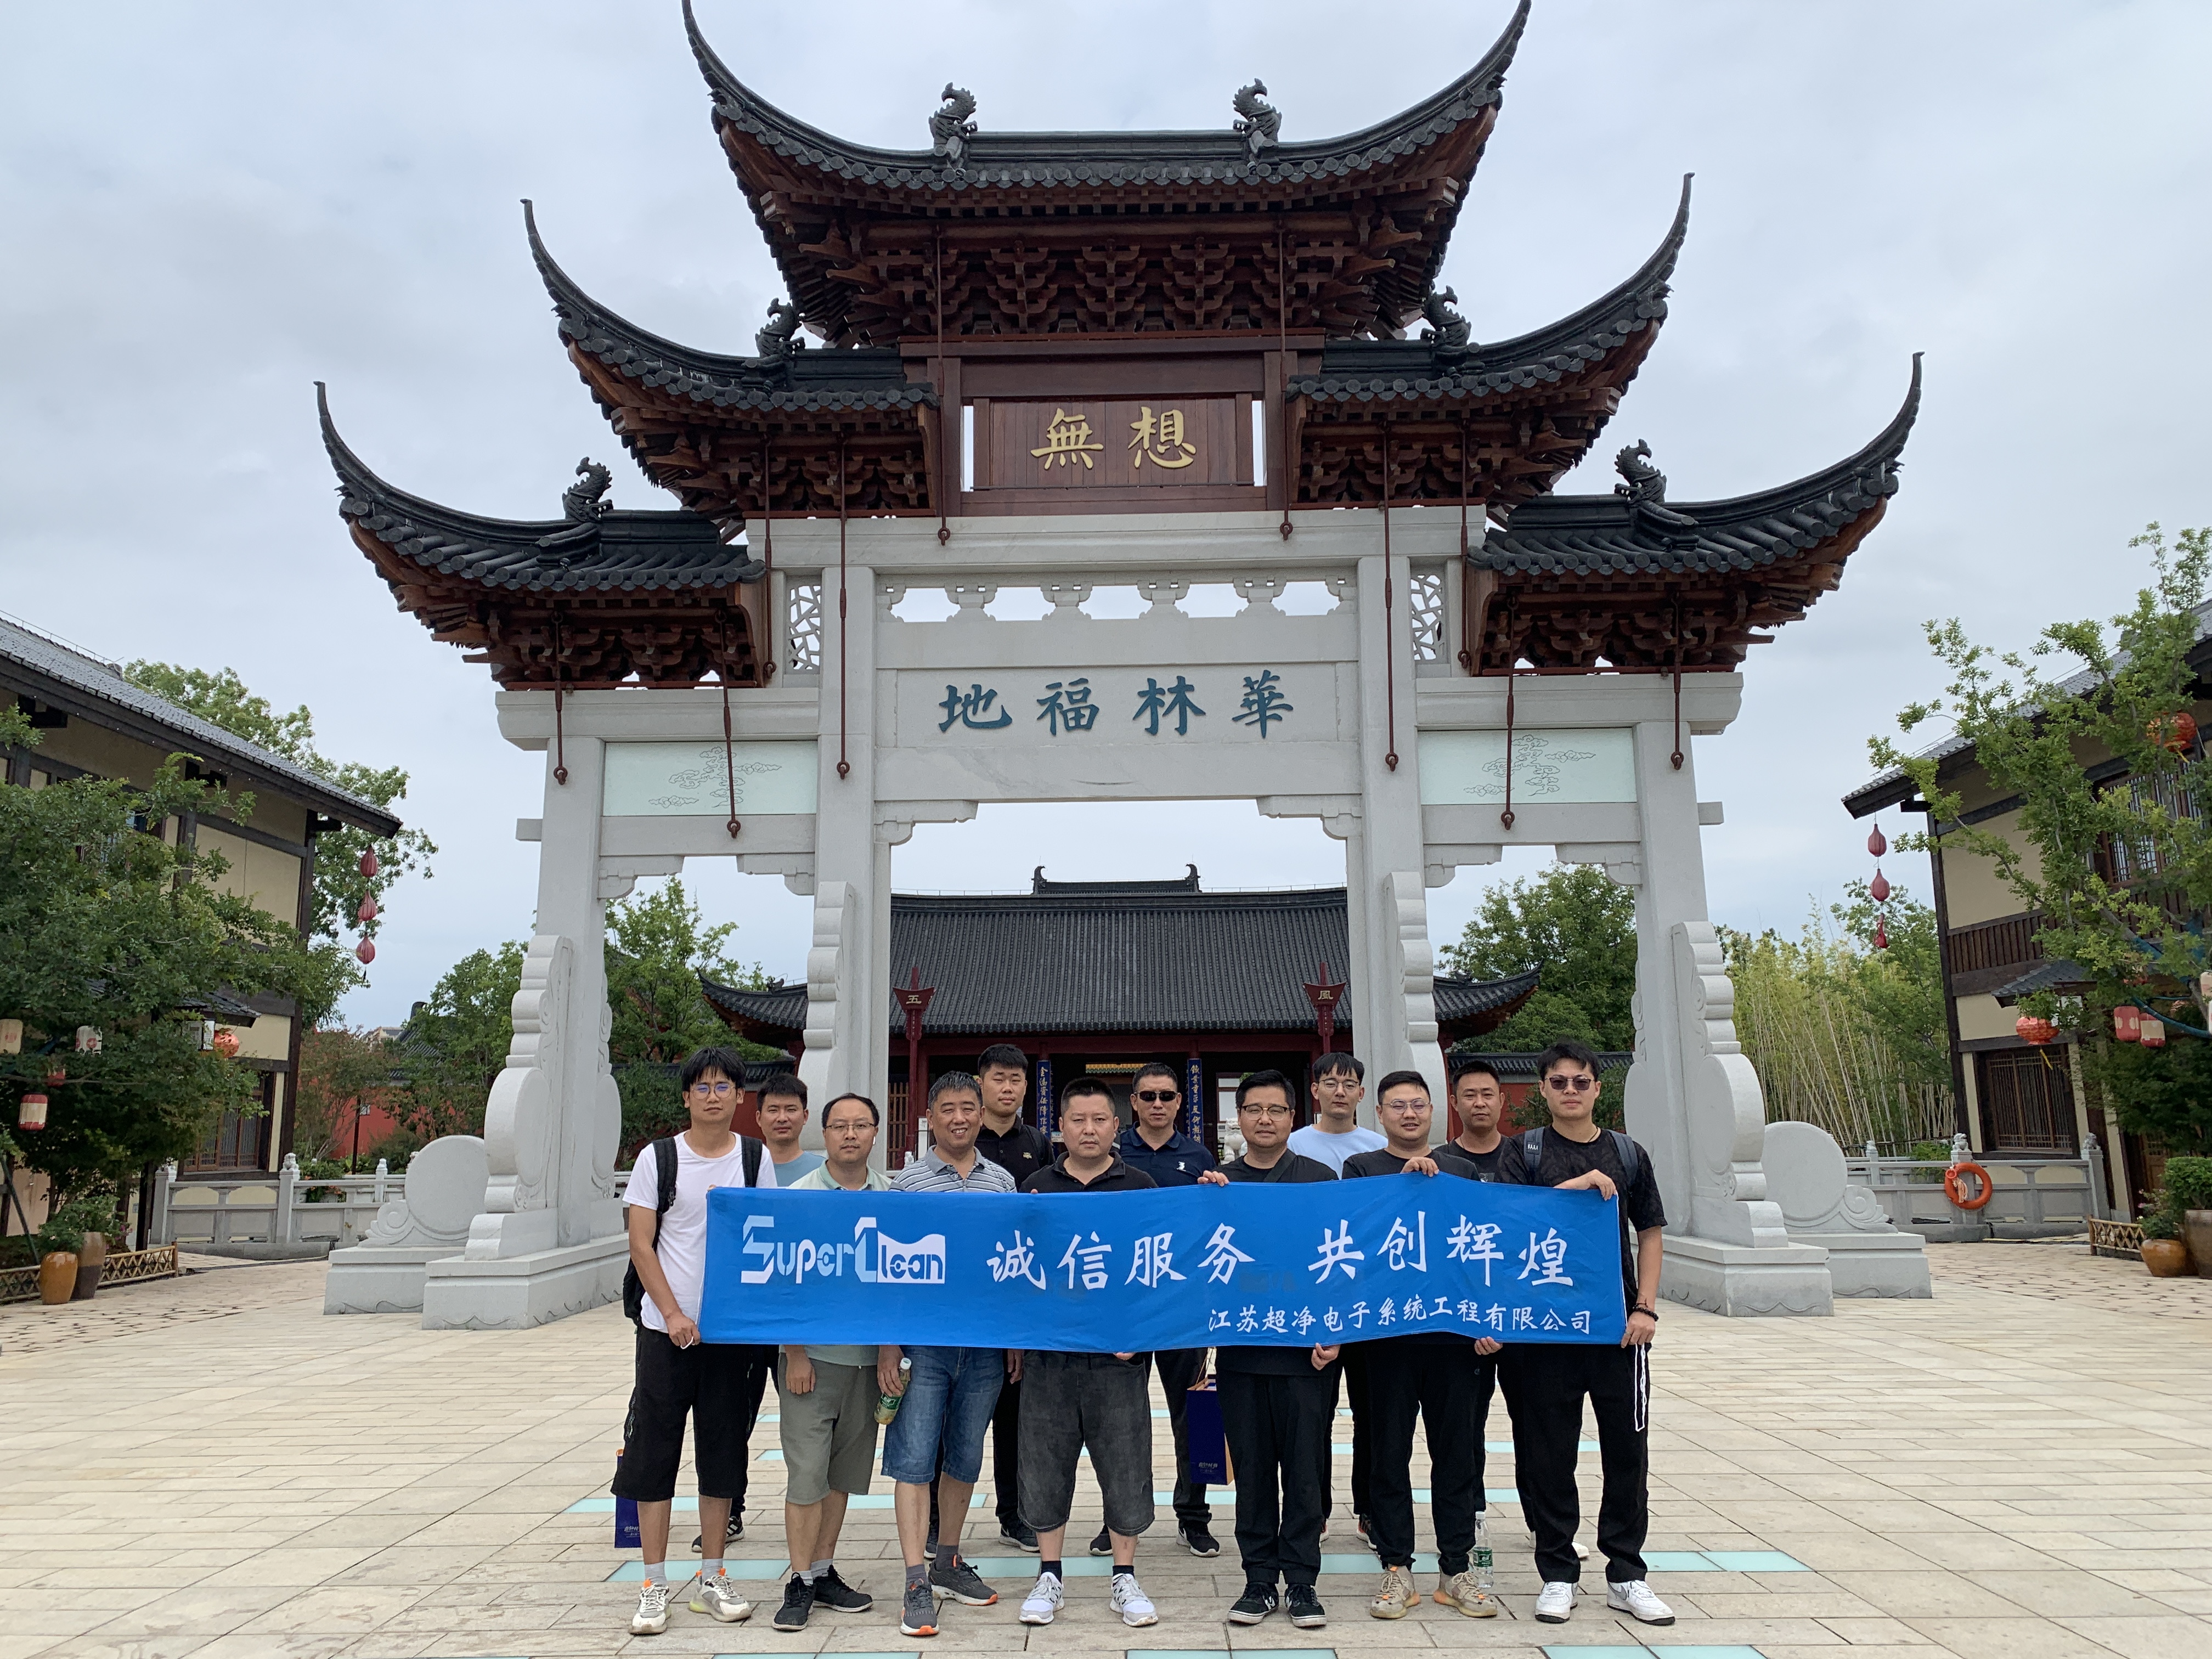 Super Clean Engineering Department Lishui Wuxiangshan Team Building Activity